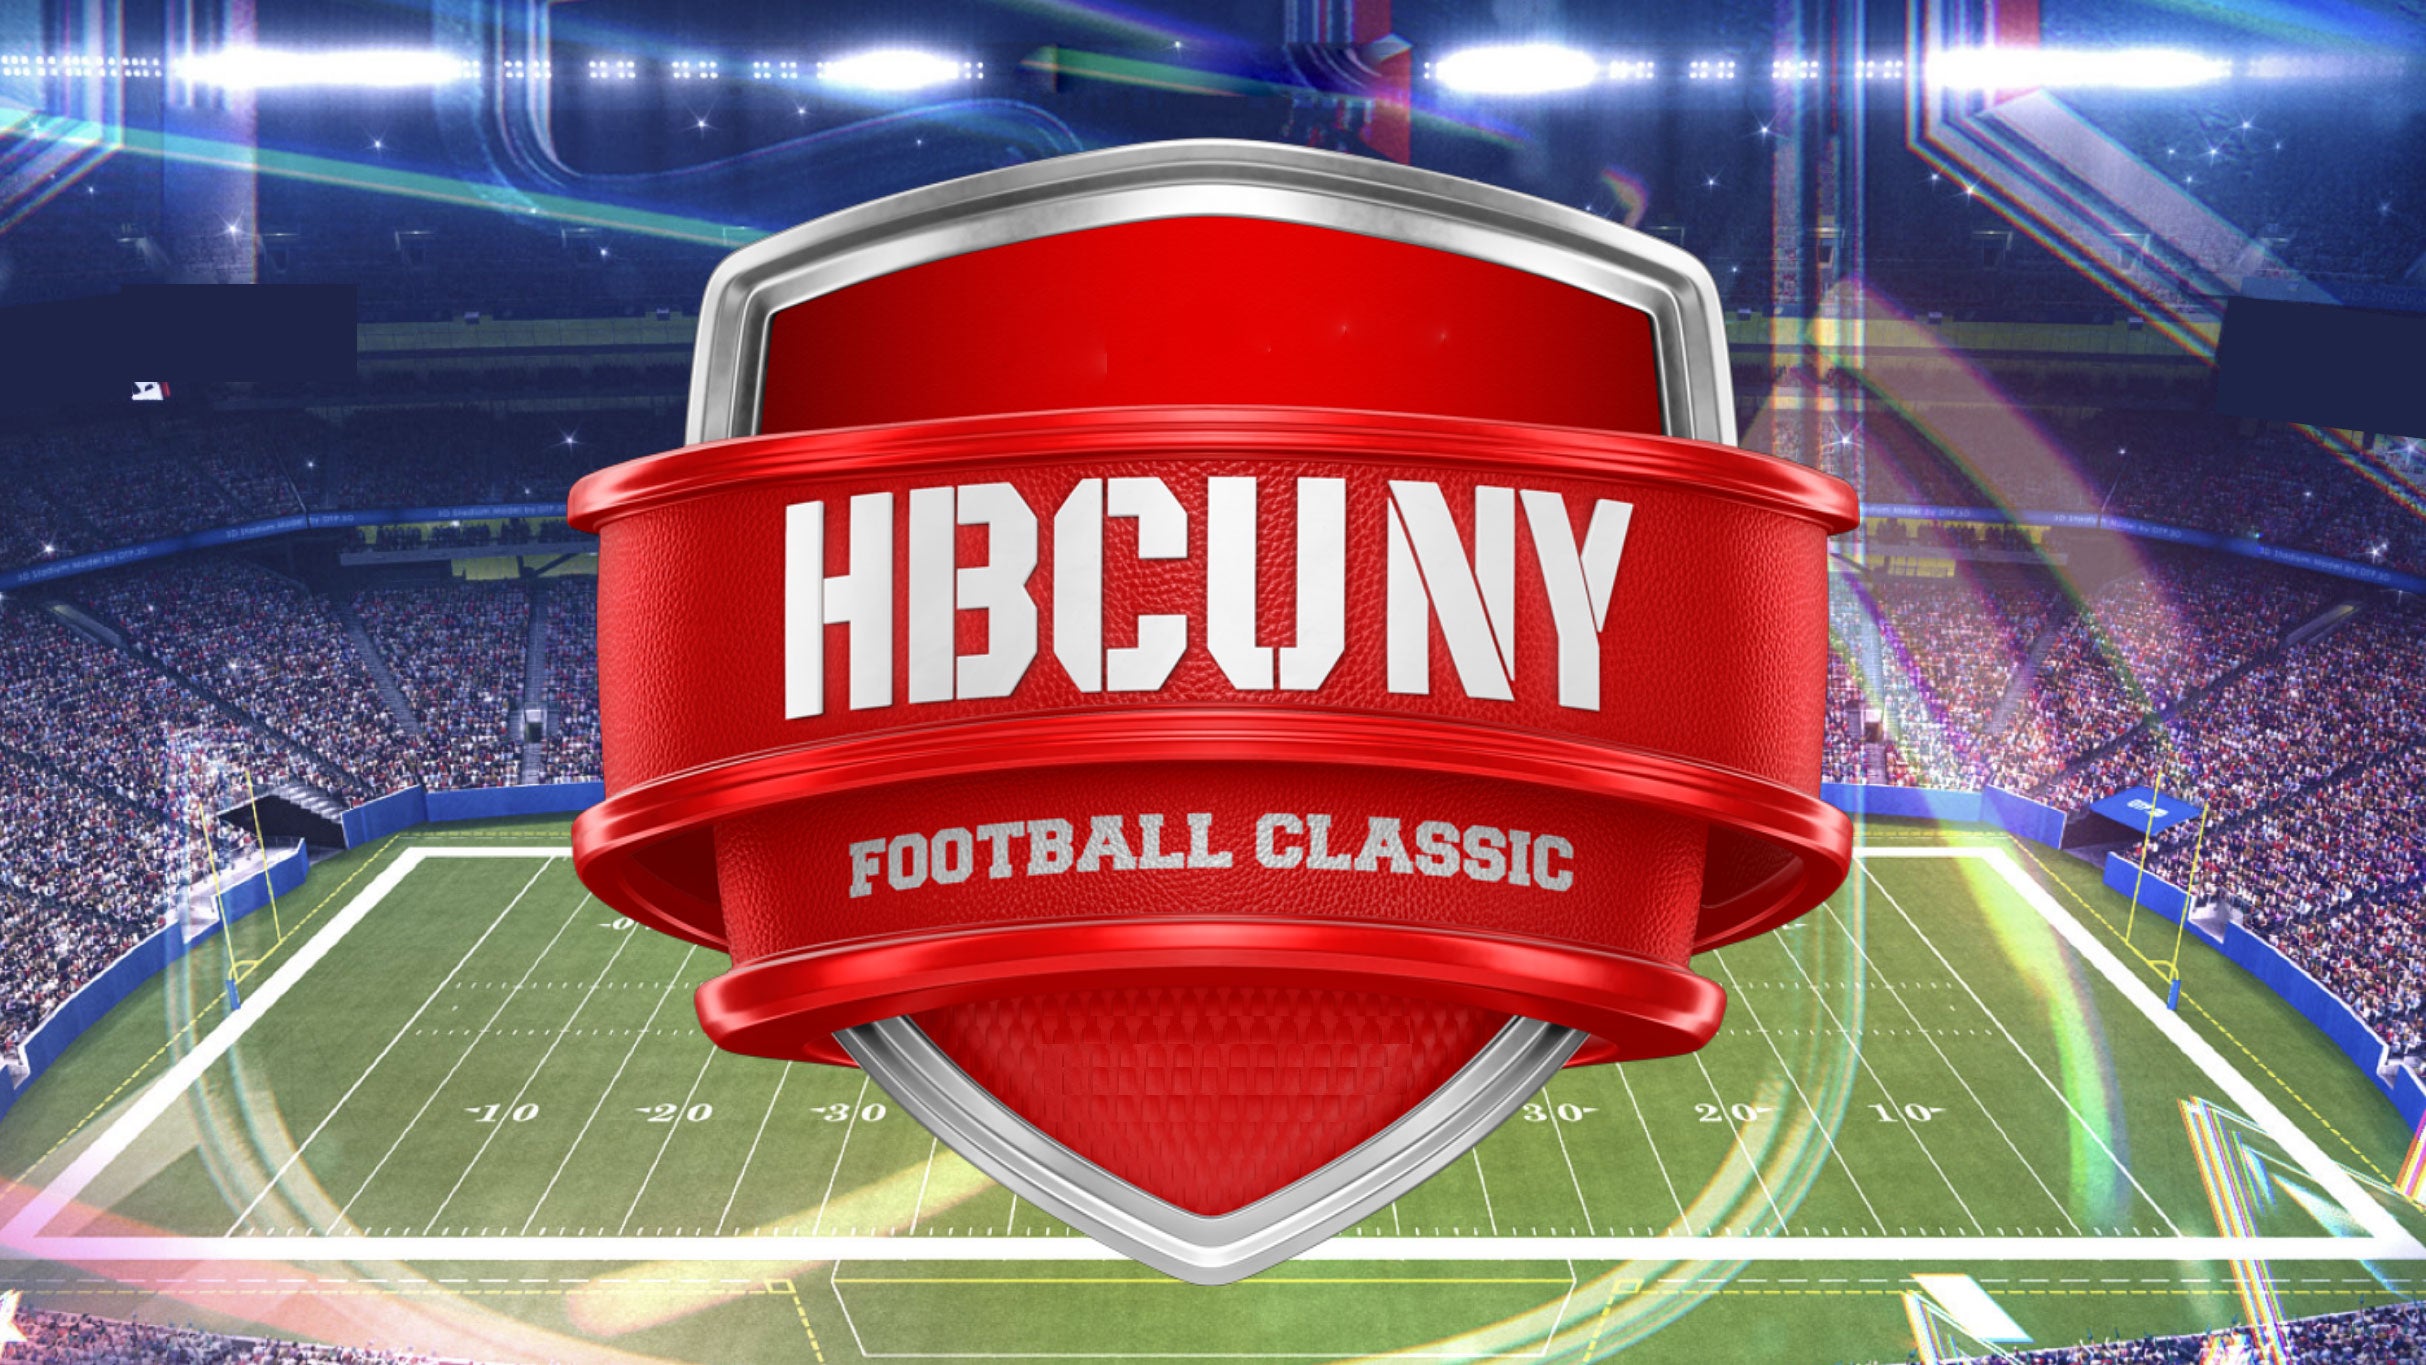 HBCU New York Football Classic-Morehouse College v. Howard University presales in East Rutherford